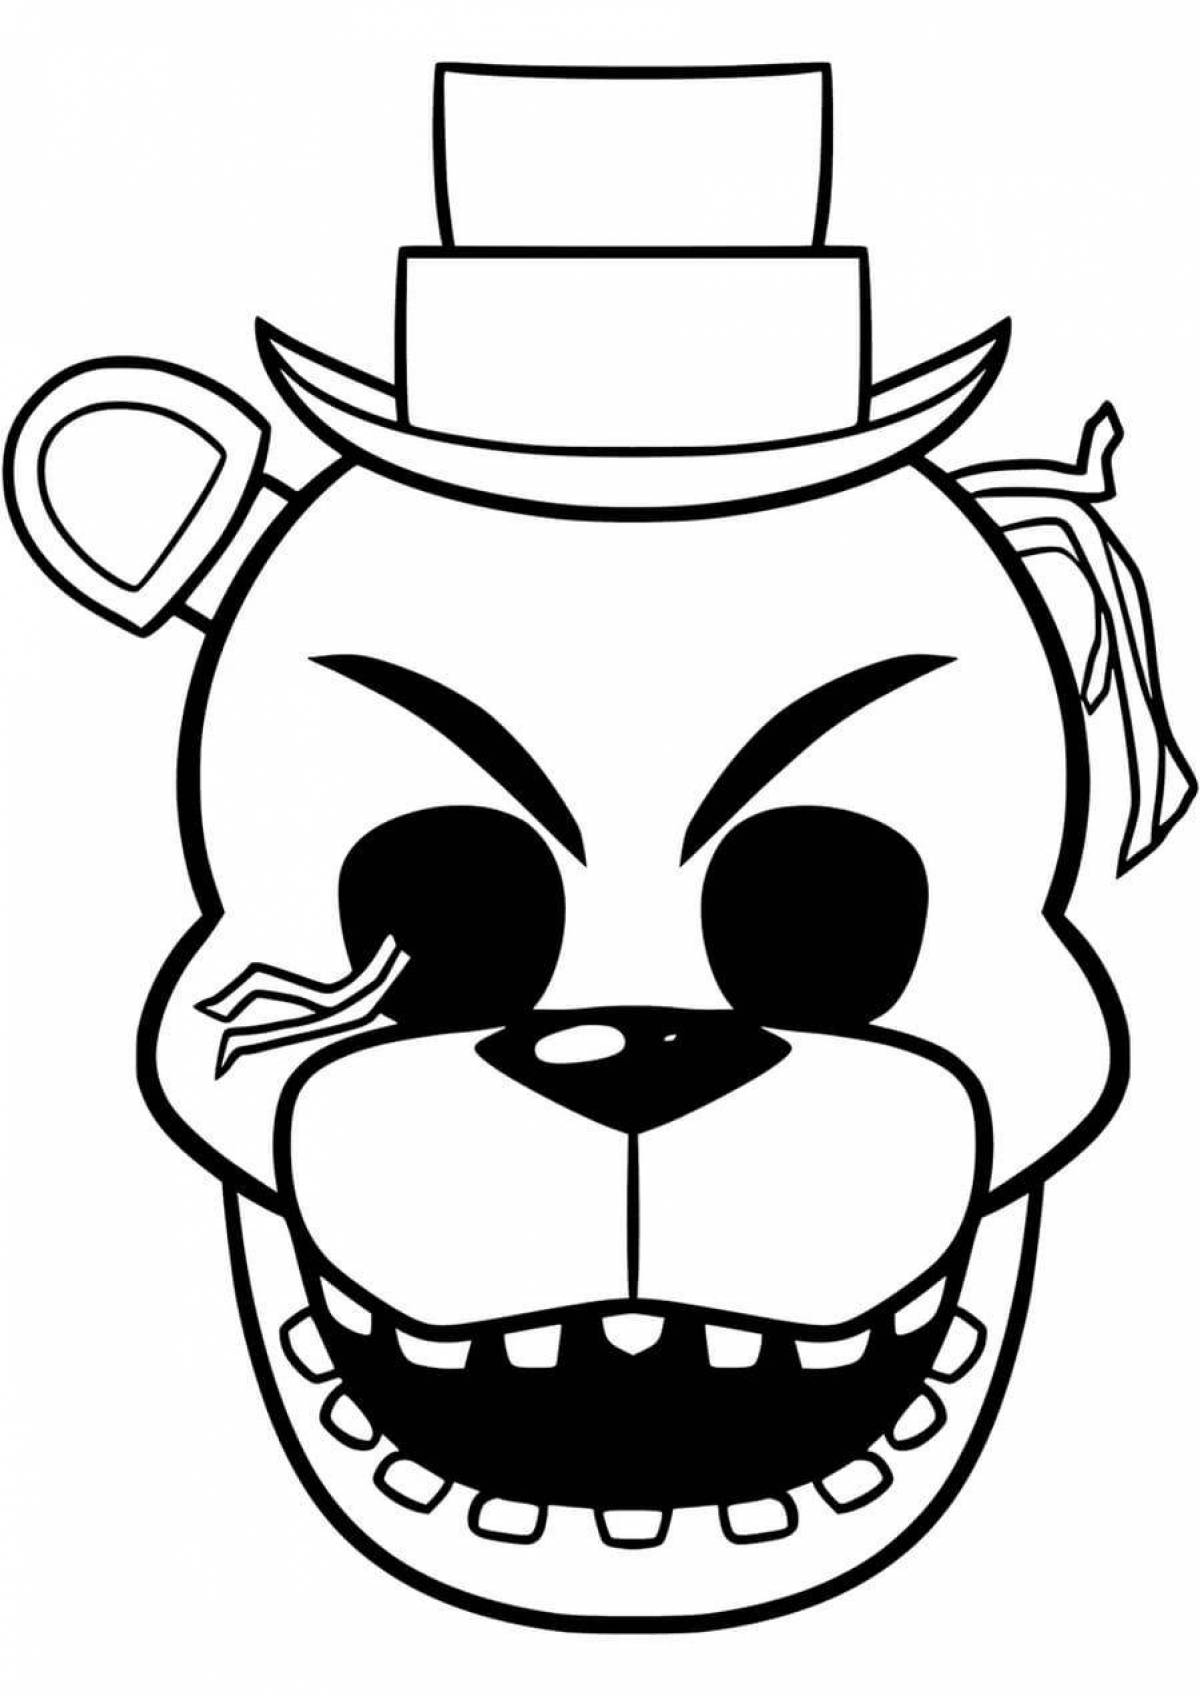 Engaging five nights at freddy's coloring page